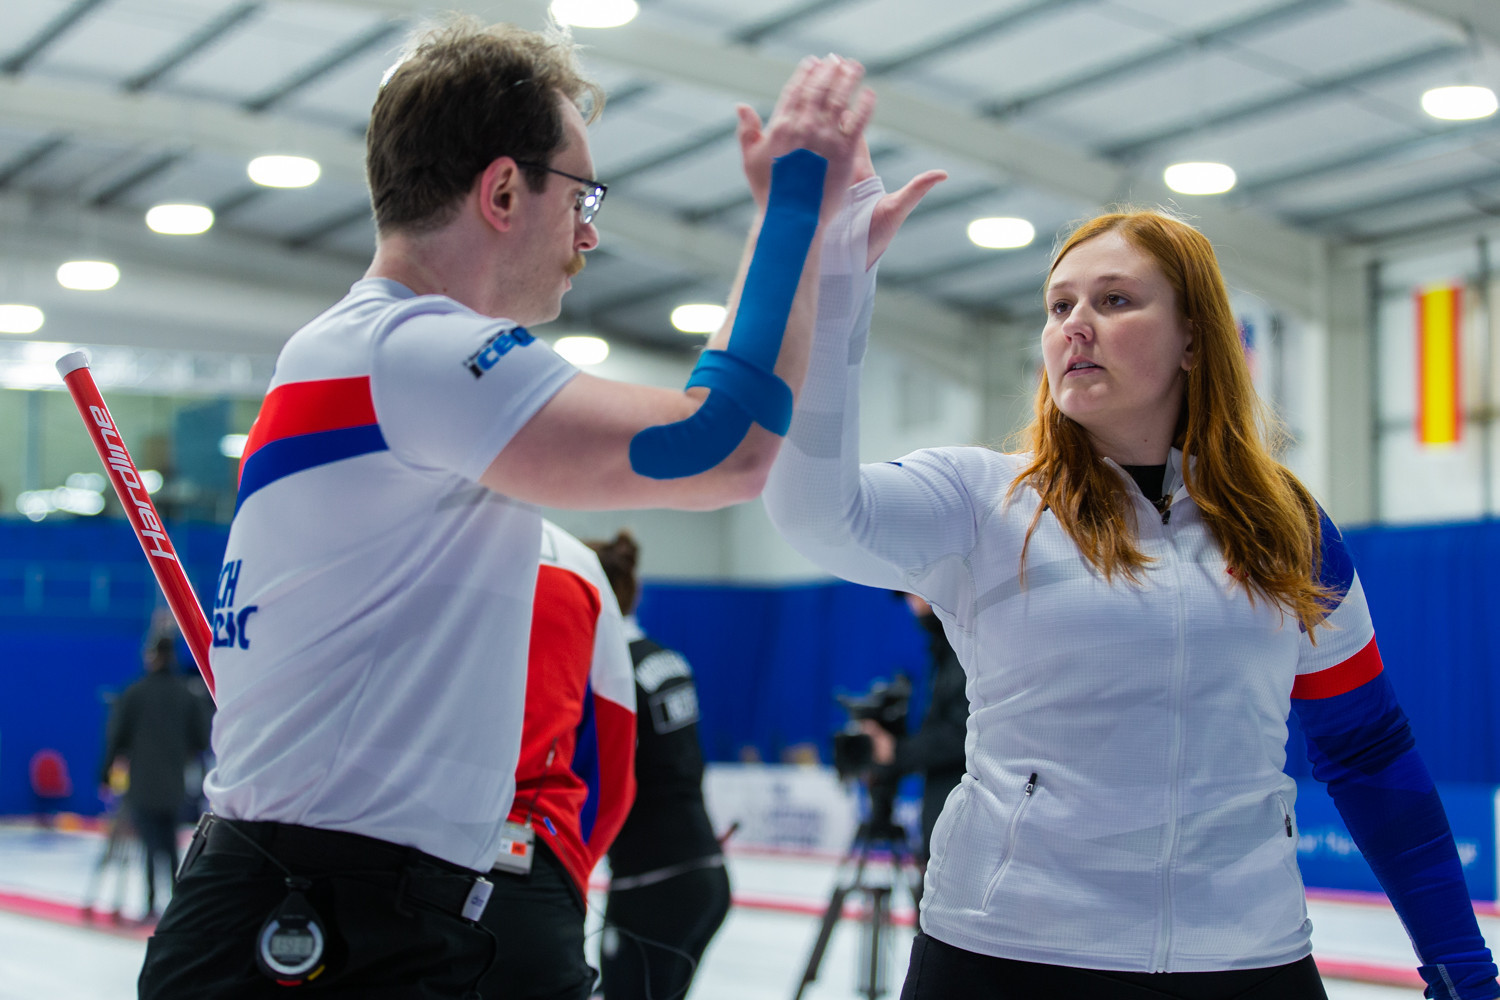 Five teams remain unbeaten following second day at World Mixed Doubles Curling Championship